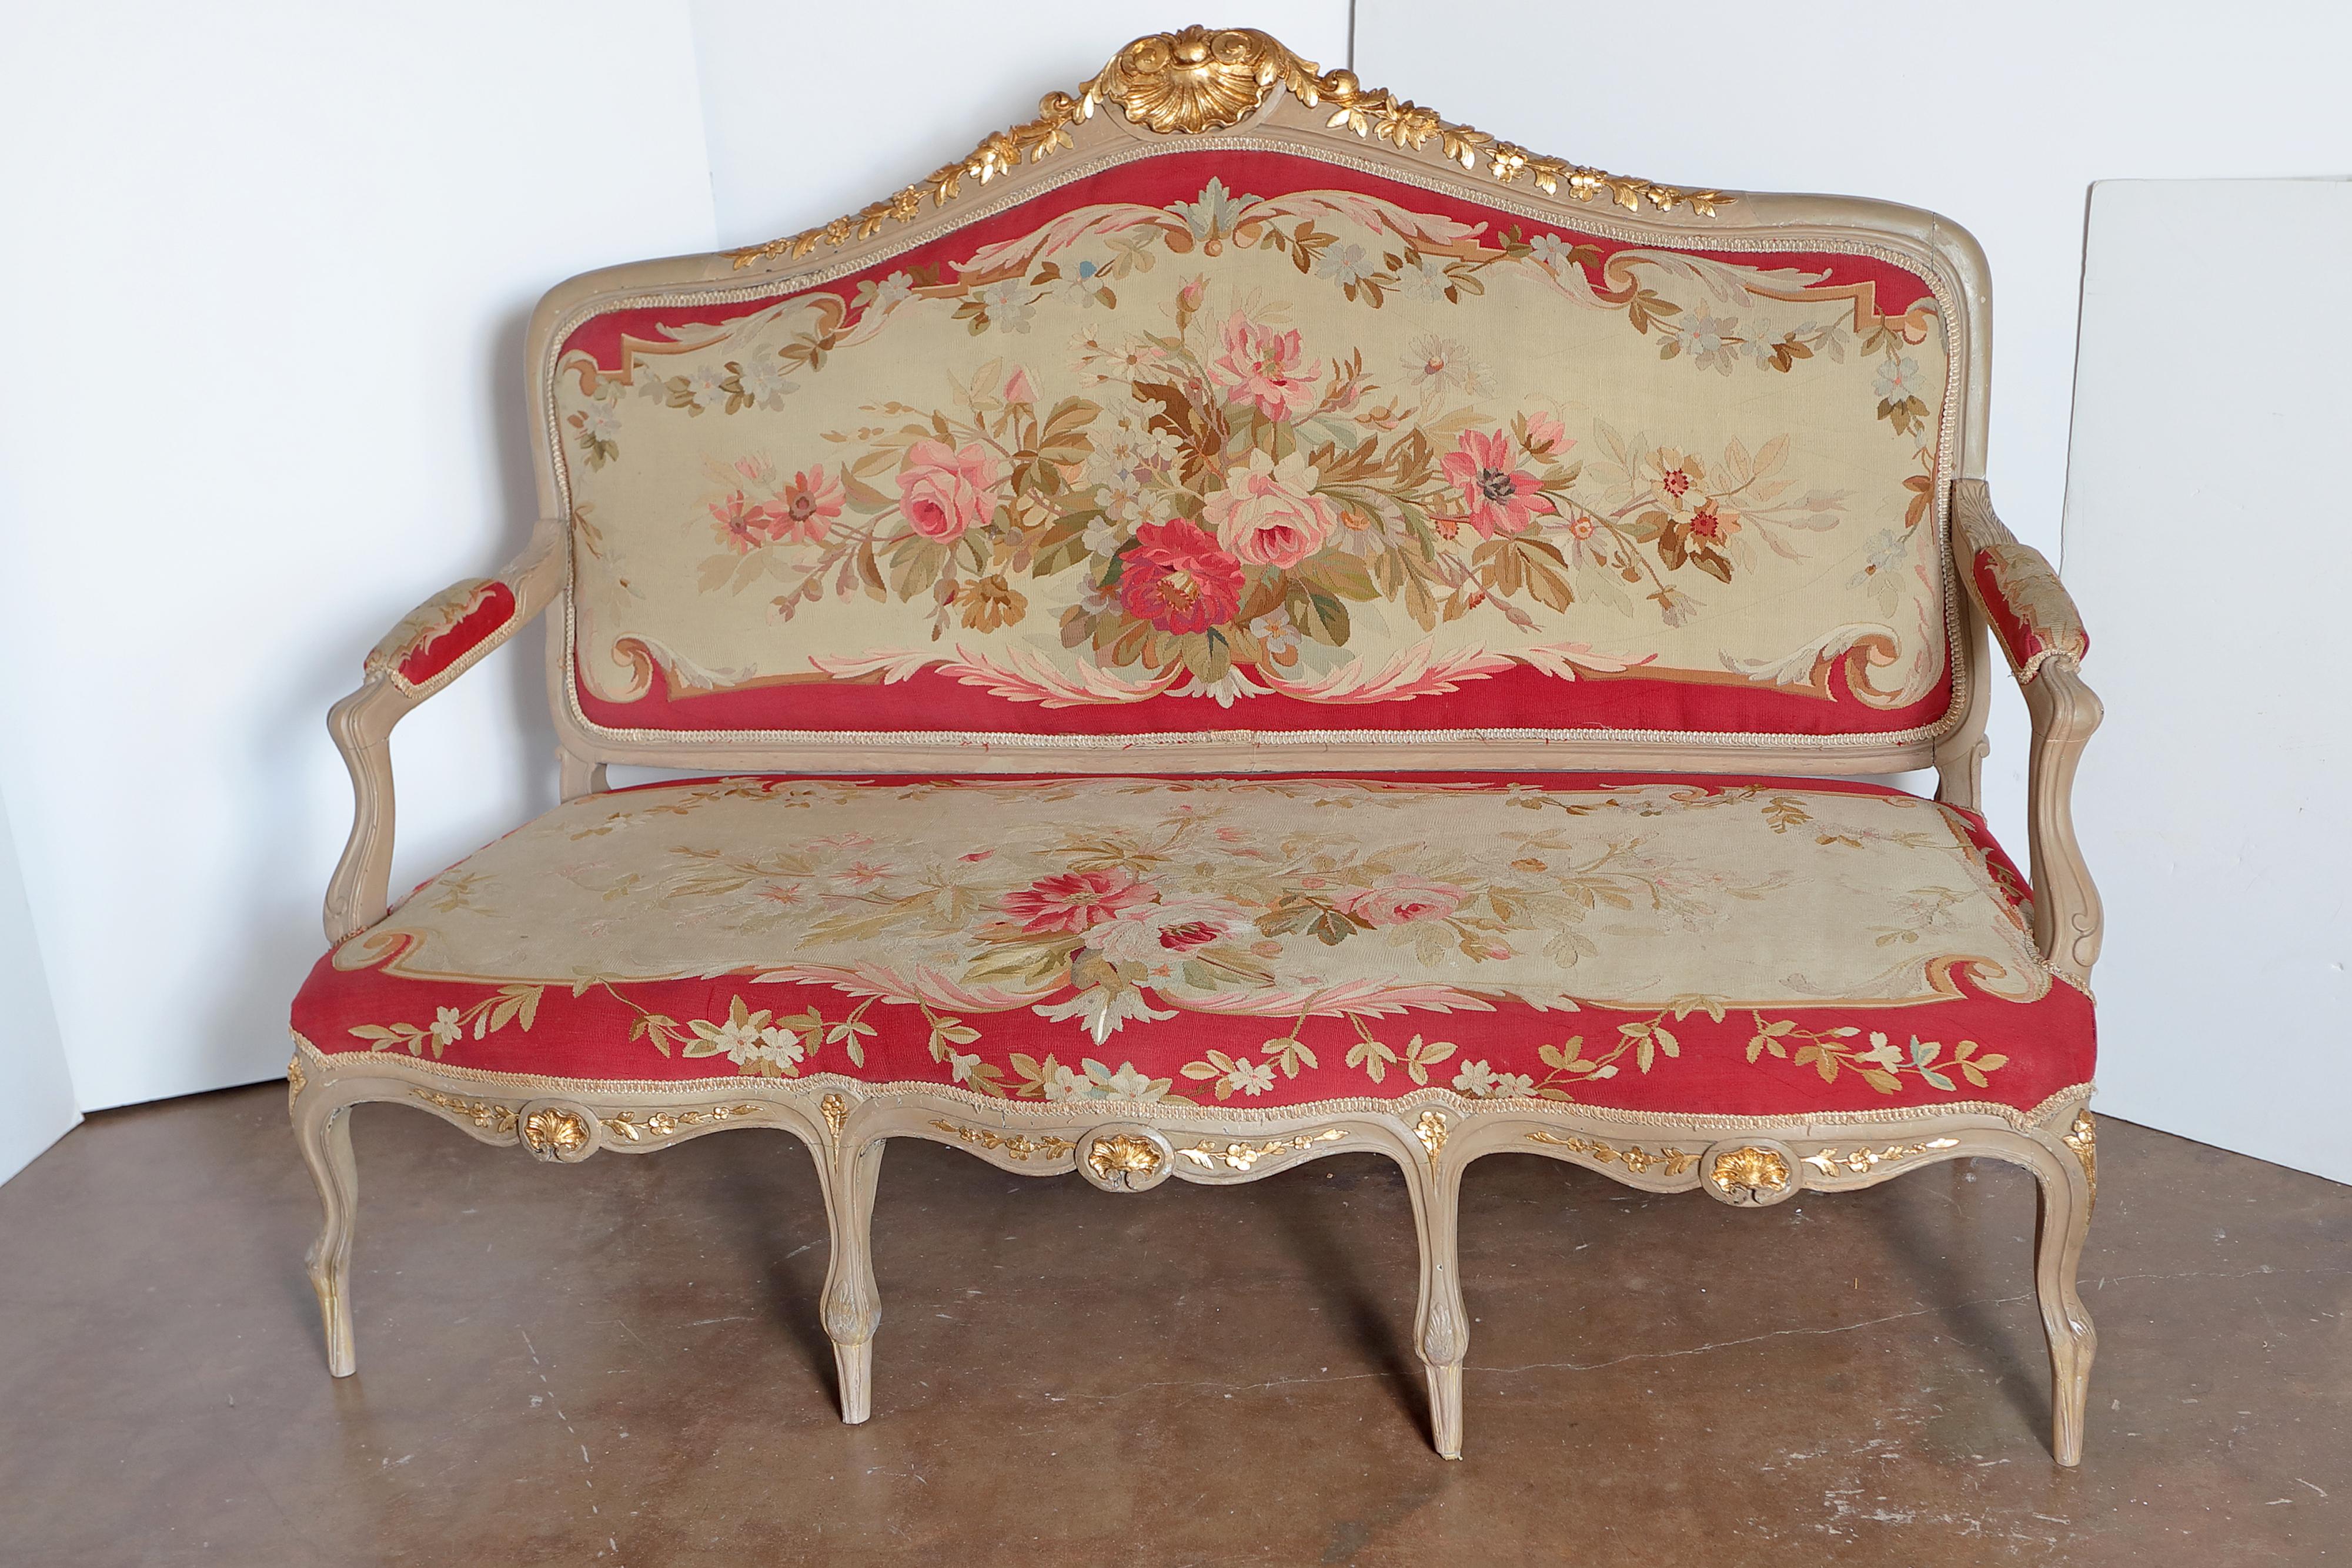 Beautiful 19th century French large suite consisting of a settee and 4 arm chairs and two side chairs. Original painted grey with parcel gilt details. Beautiful Aubusson tapestry with floral detail.